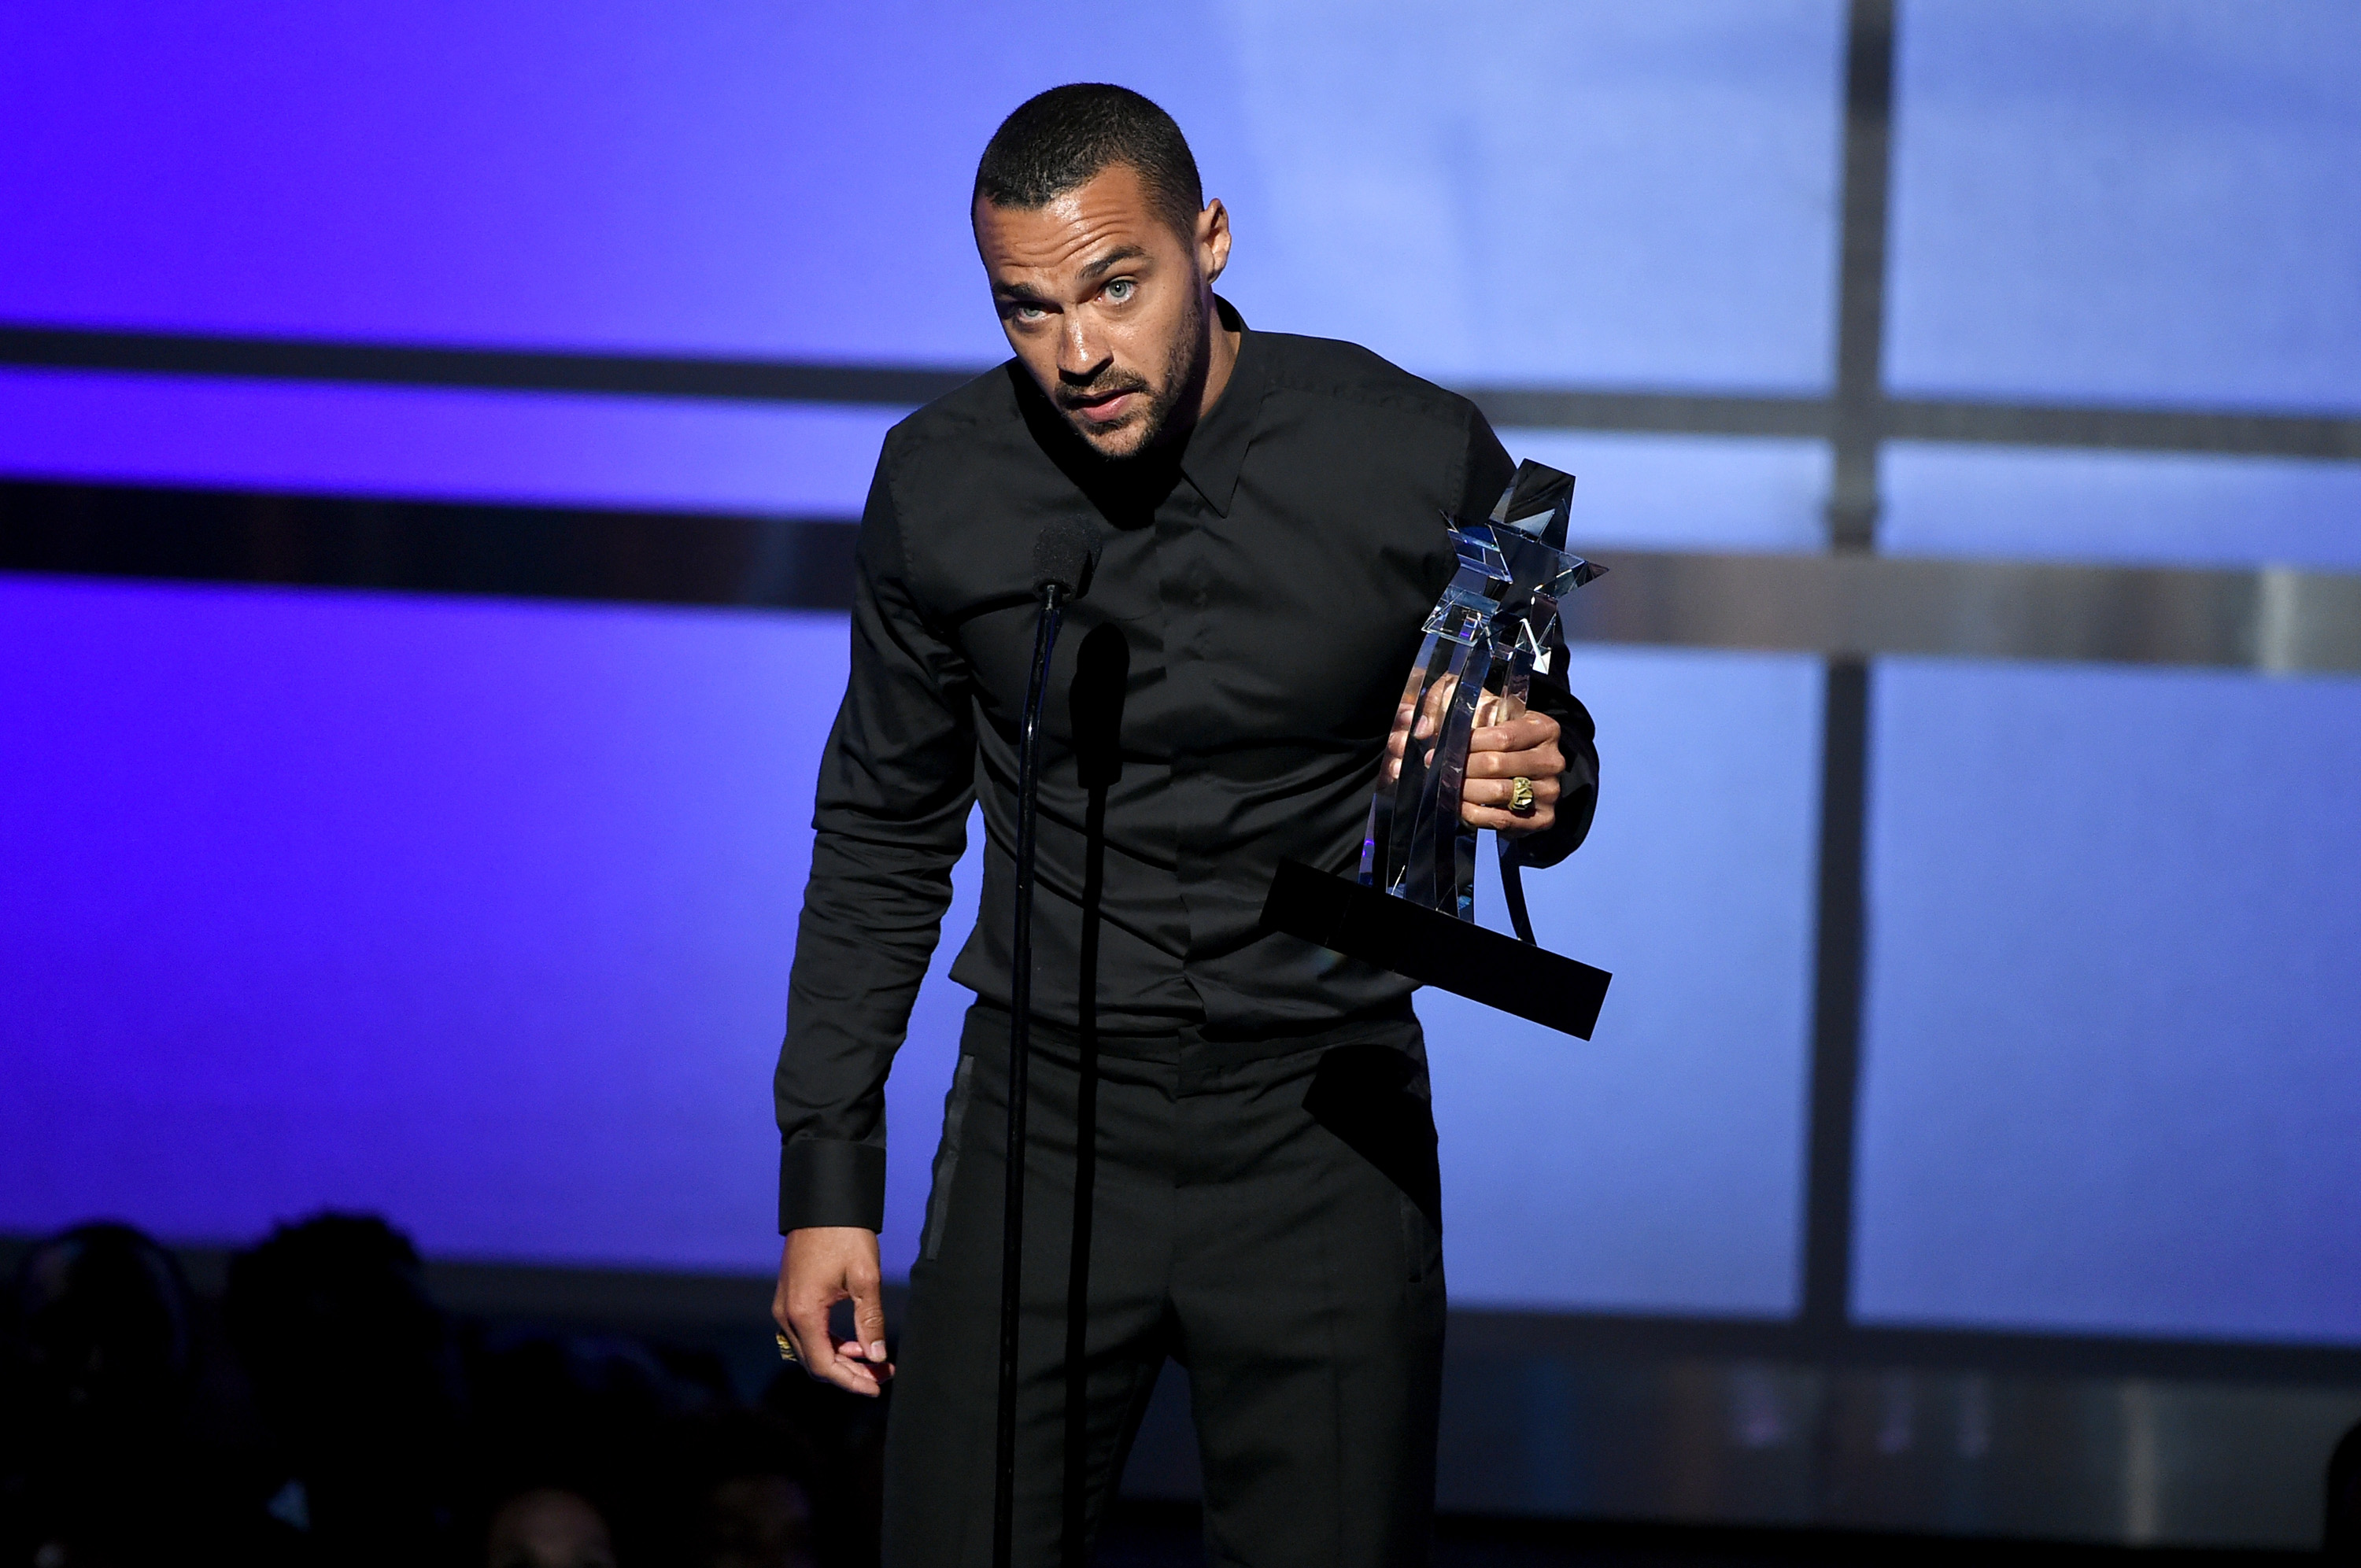 Honoree Jesse Williams accepts the Humanitarian Award onstage during the 2016 BET Awards at the Microsoft Theater on June 26 in Los Angeles, California. (Kevin Winter—BET/Getty Images)